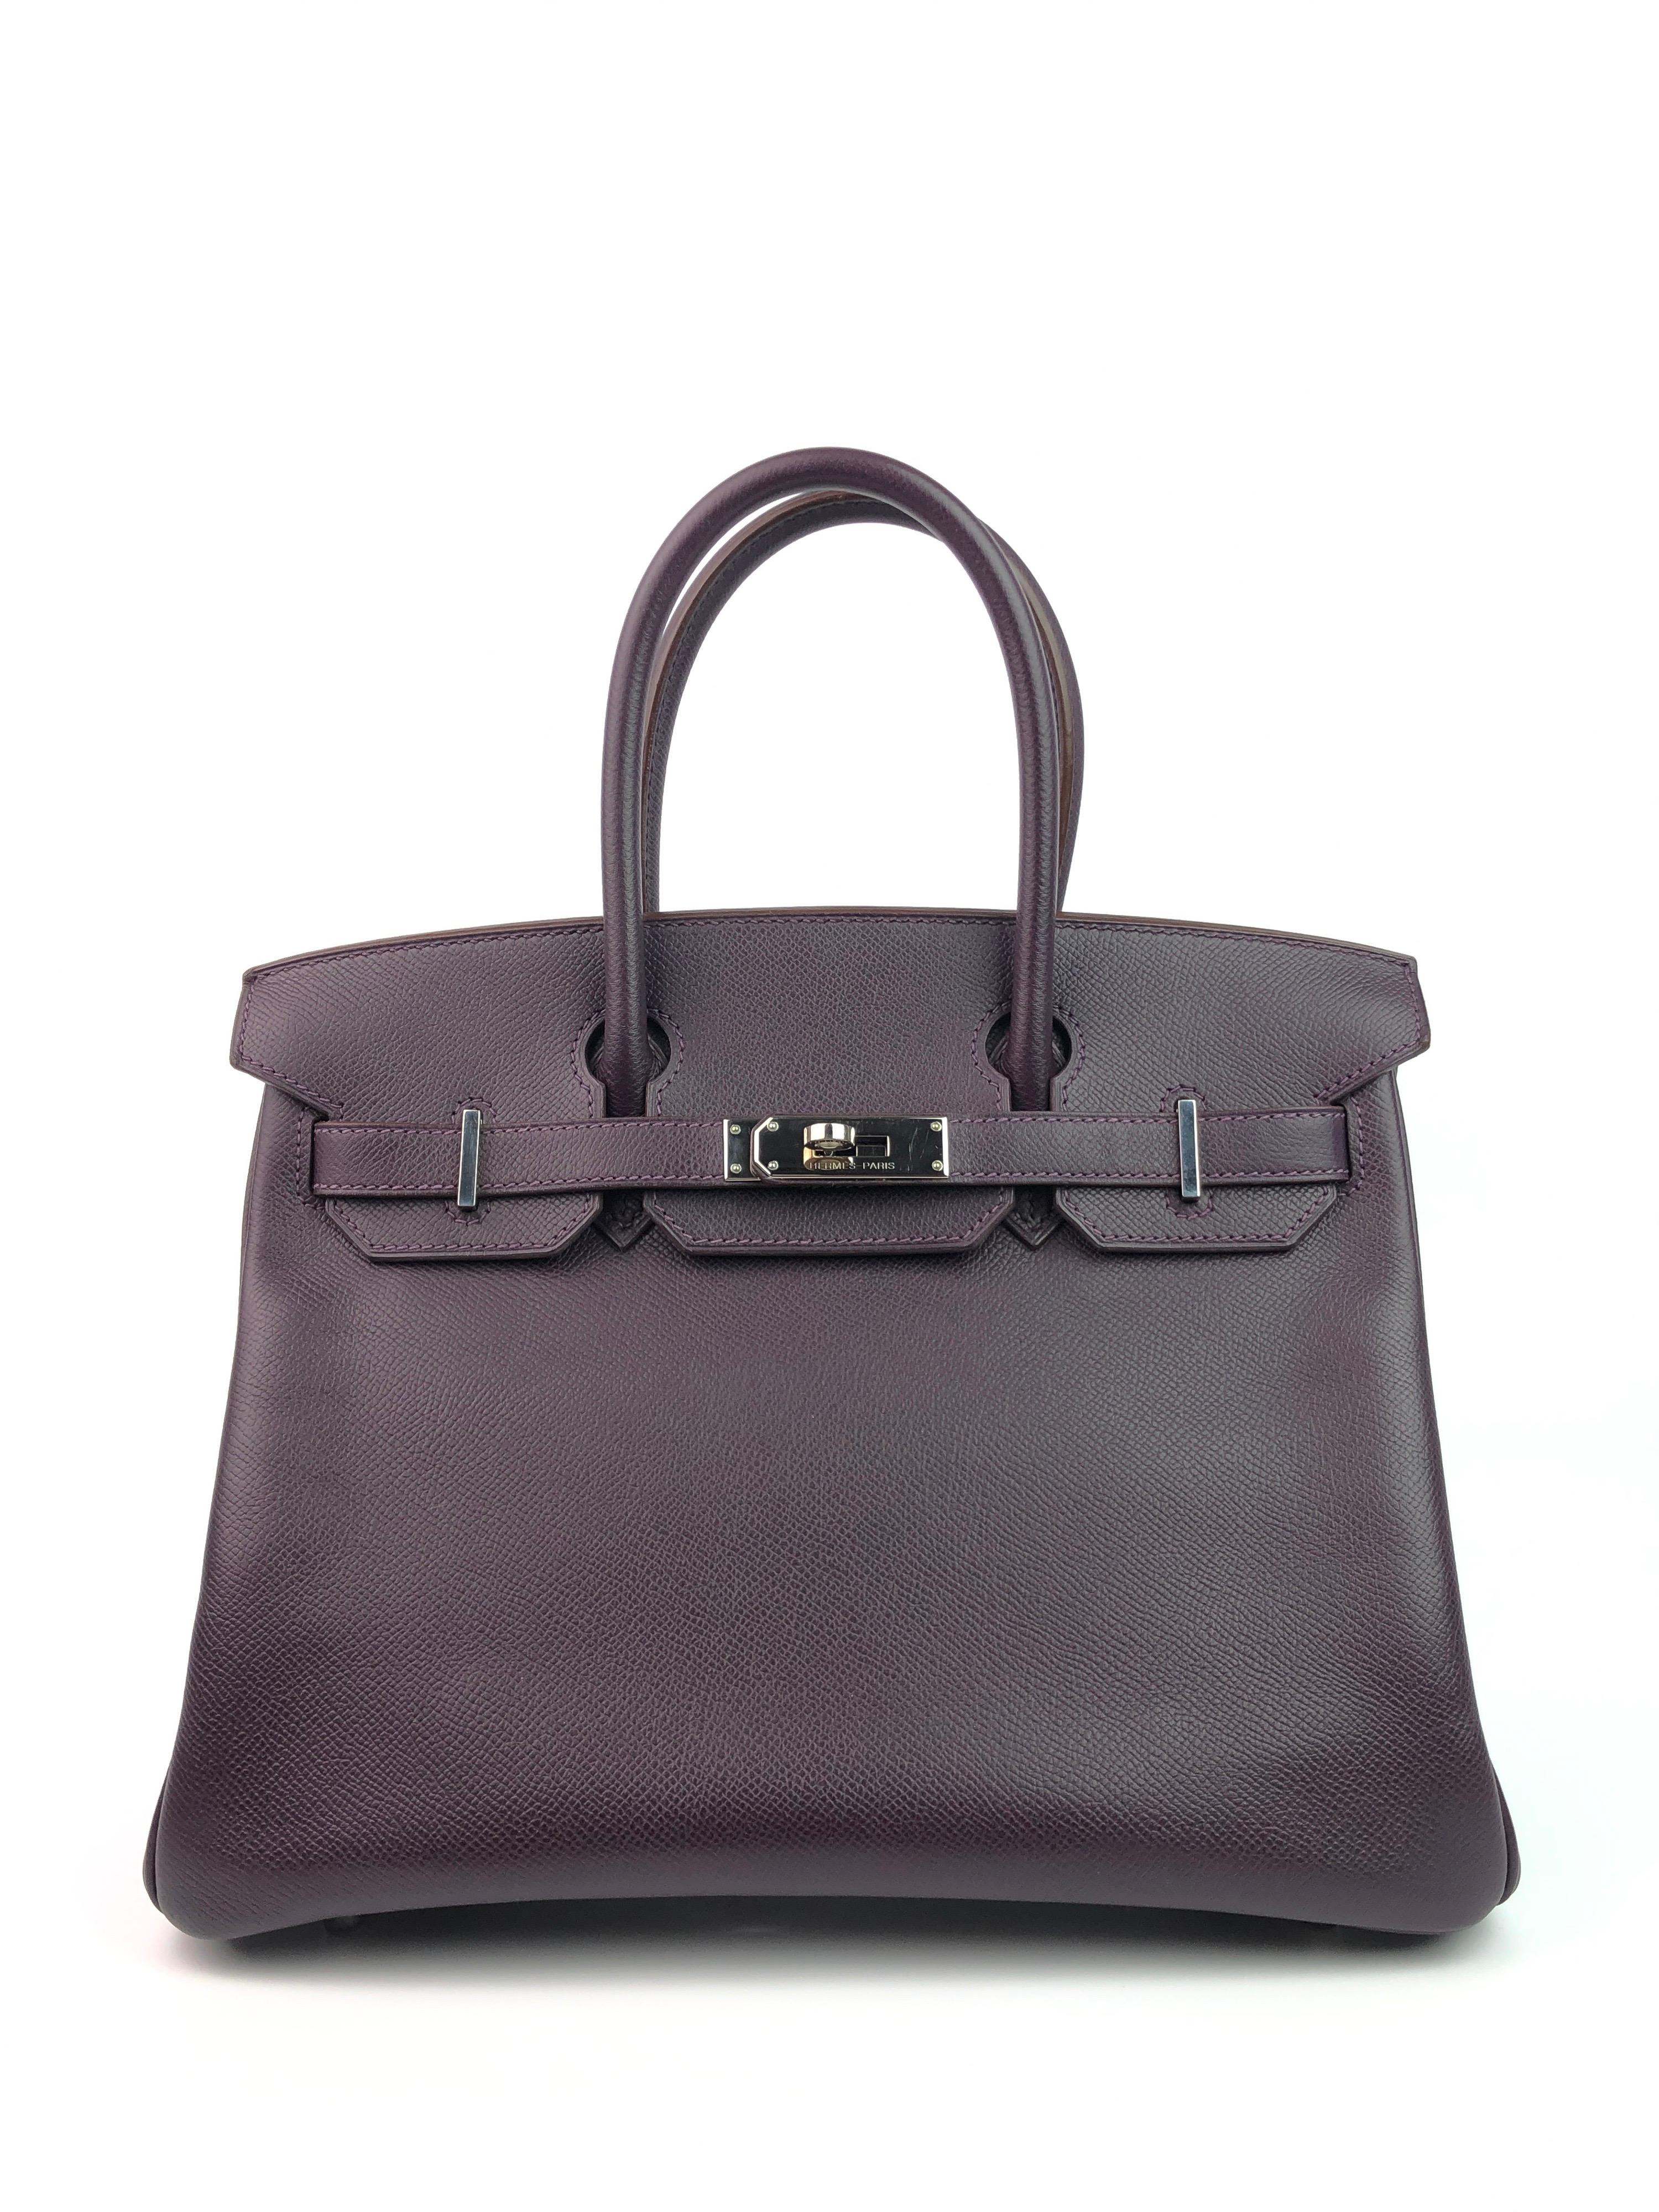 RARE Hermes Birkin 30 Raisin Purple Epsom Palladium Hardware.  Excellent Condition Hairlines on Hardware, Excellent corners and Structure.

Shop with Confidence from Lux Addicts. Authenticity Guaranteed! 